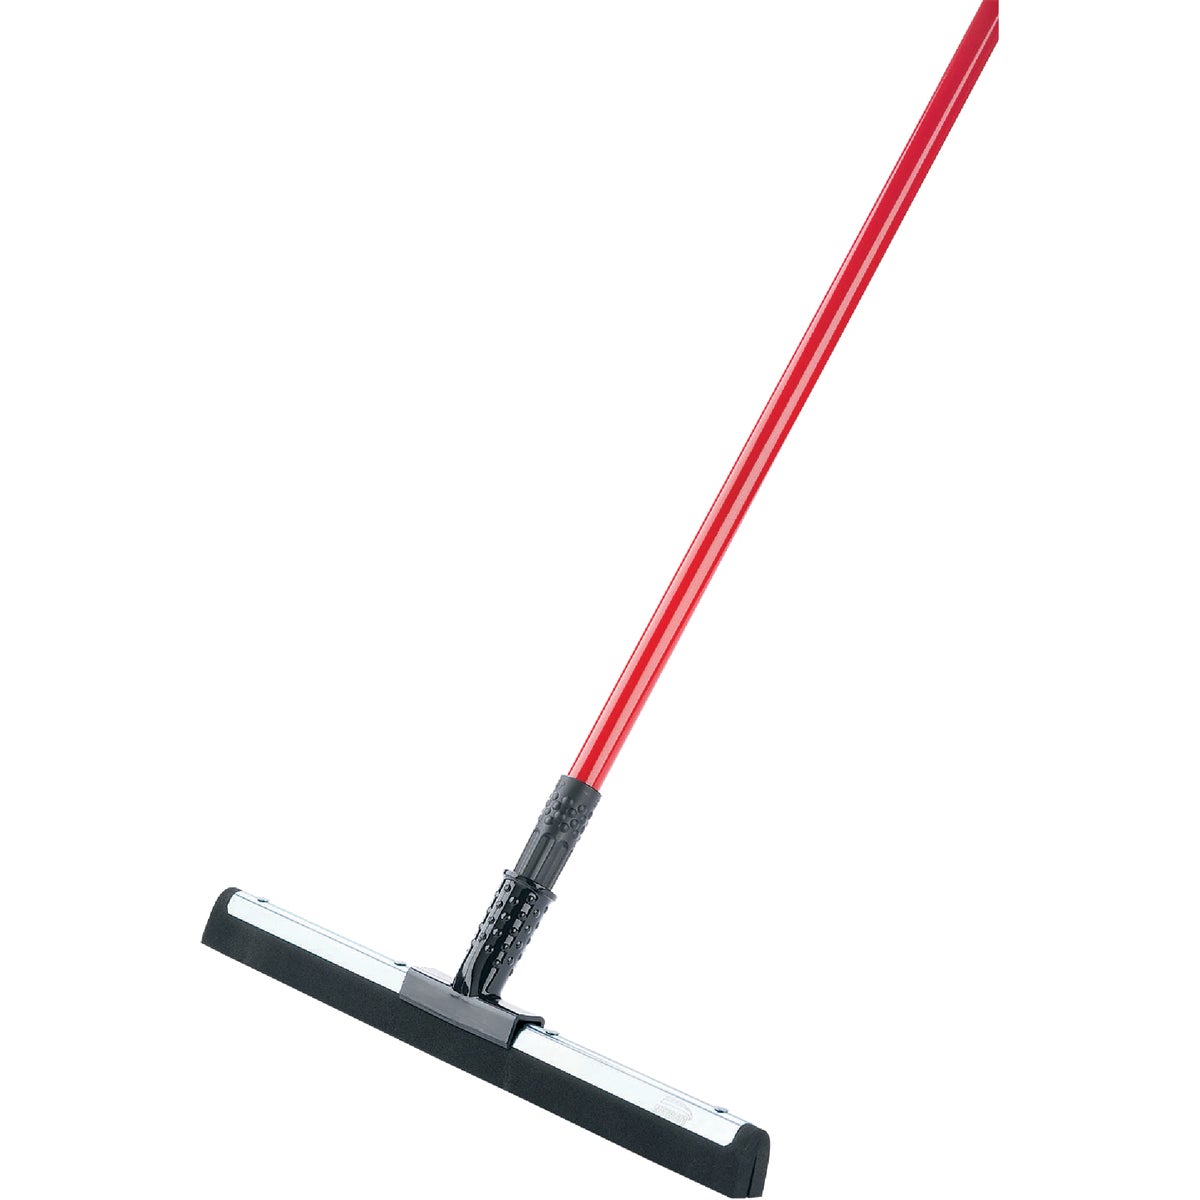 Item 602794, Squeegee has an 18 in. L. x 1.5 In. H.